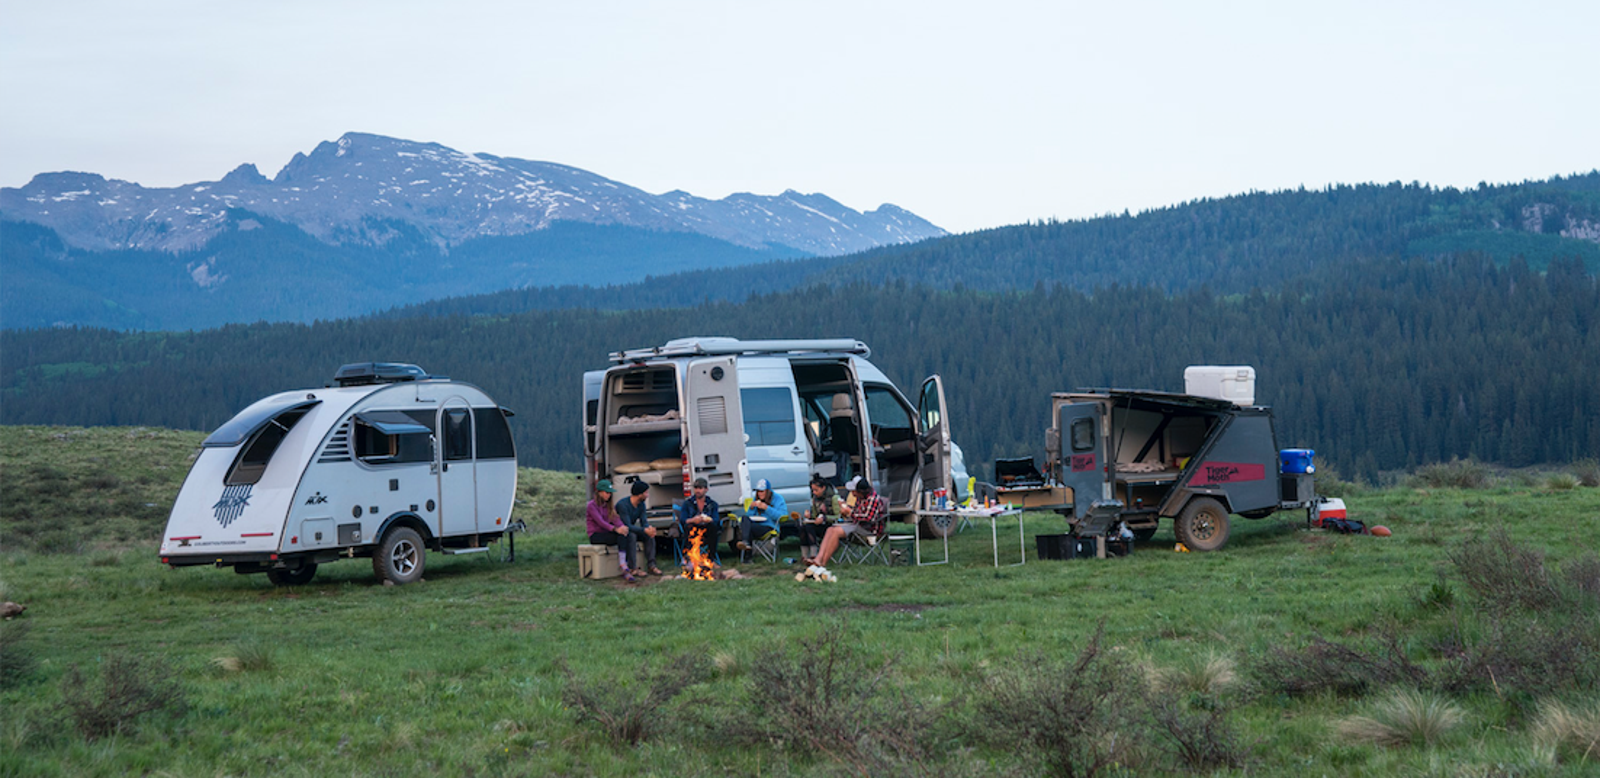 Travel curated by Go RVing